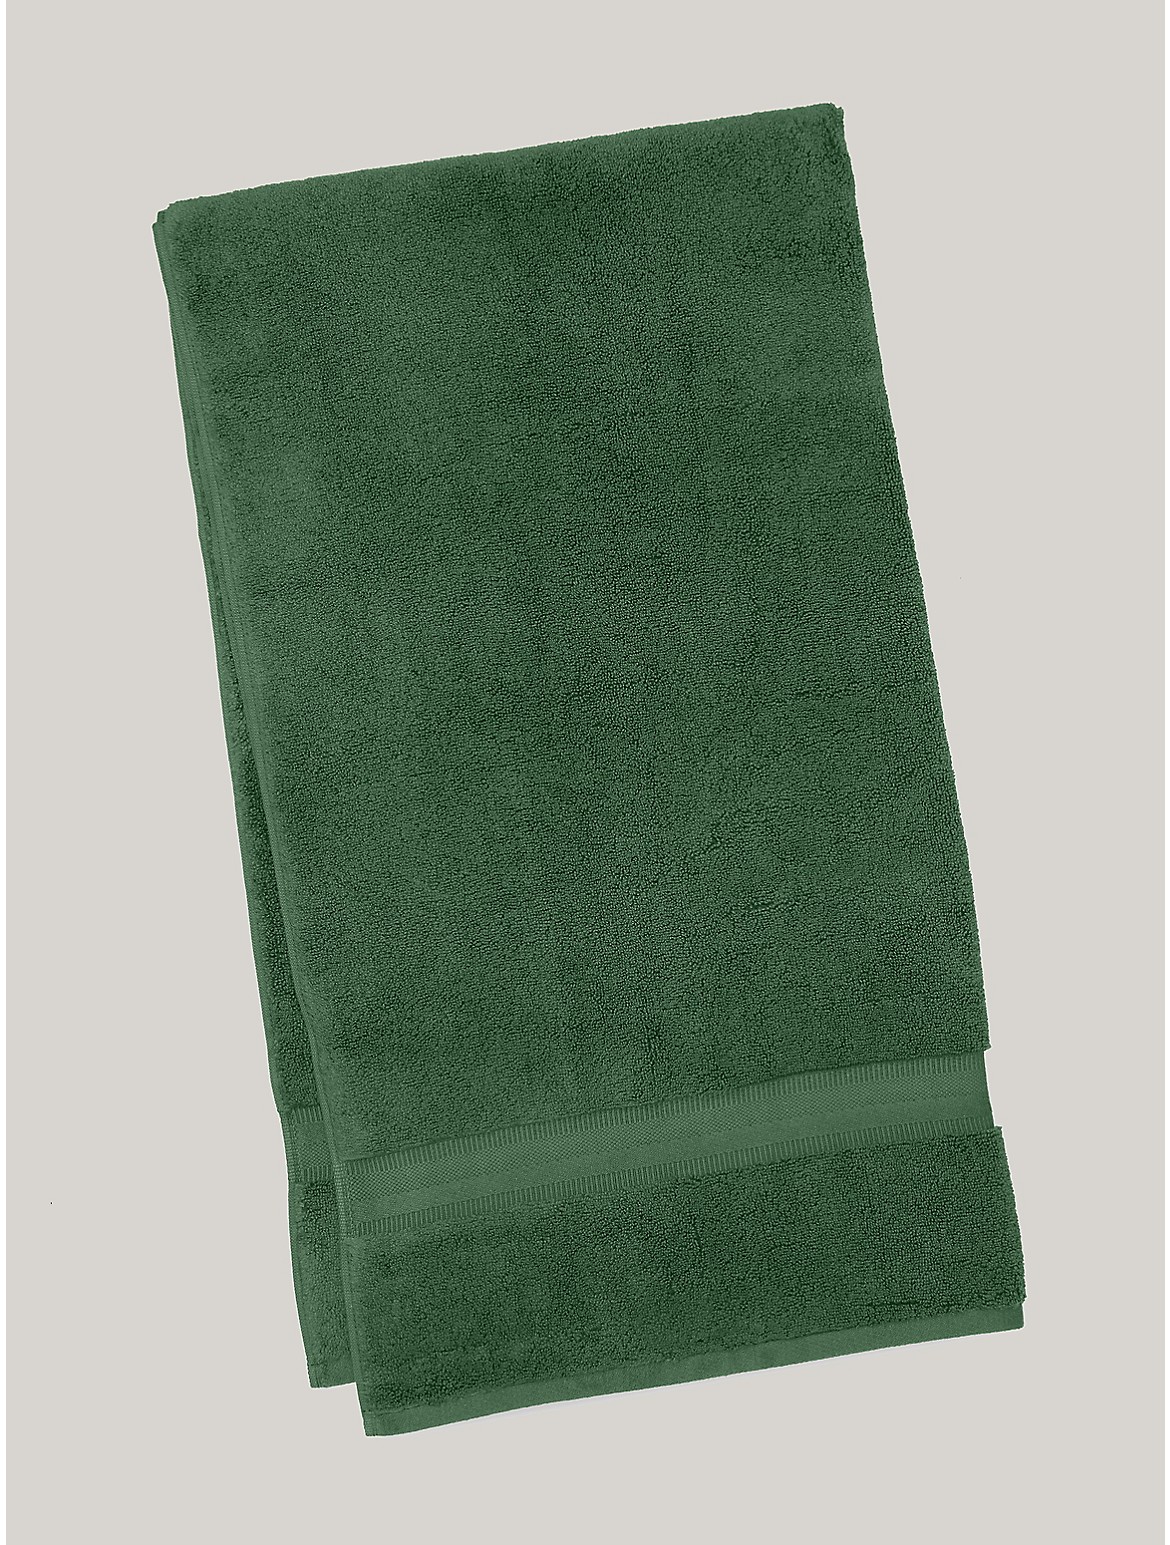 Tommy Hilfiger Signature Solid Bath Towel in Pine Needle - Green